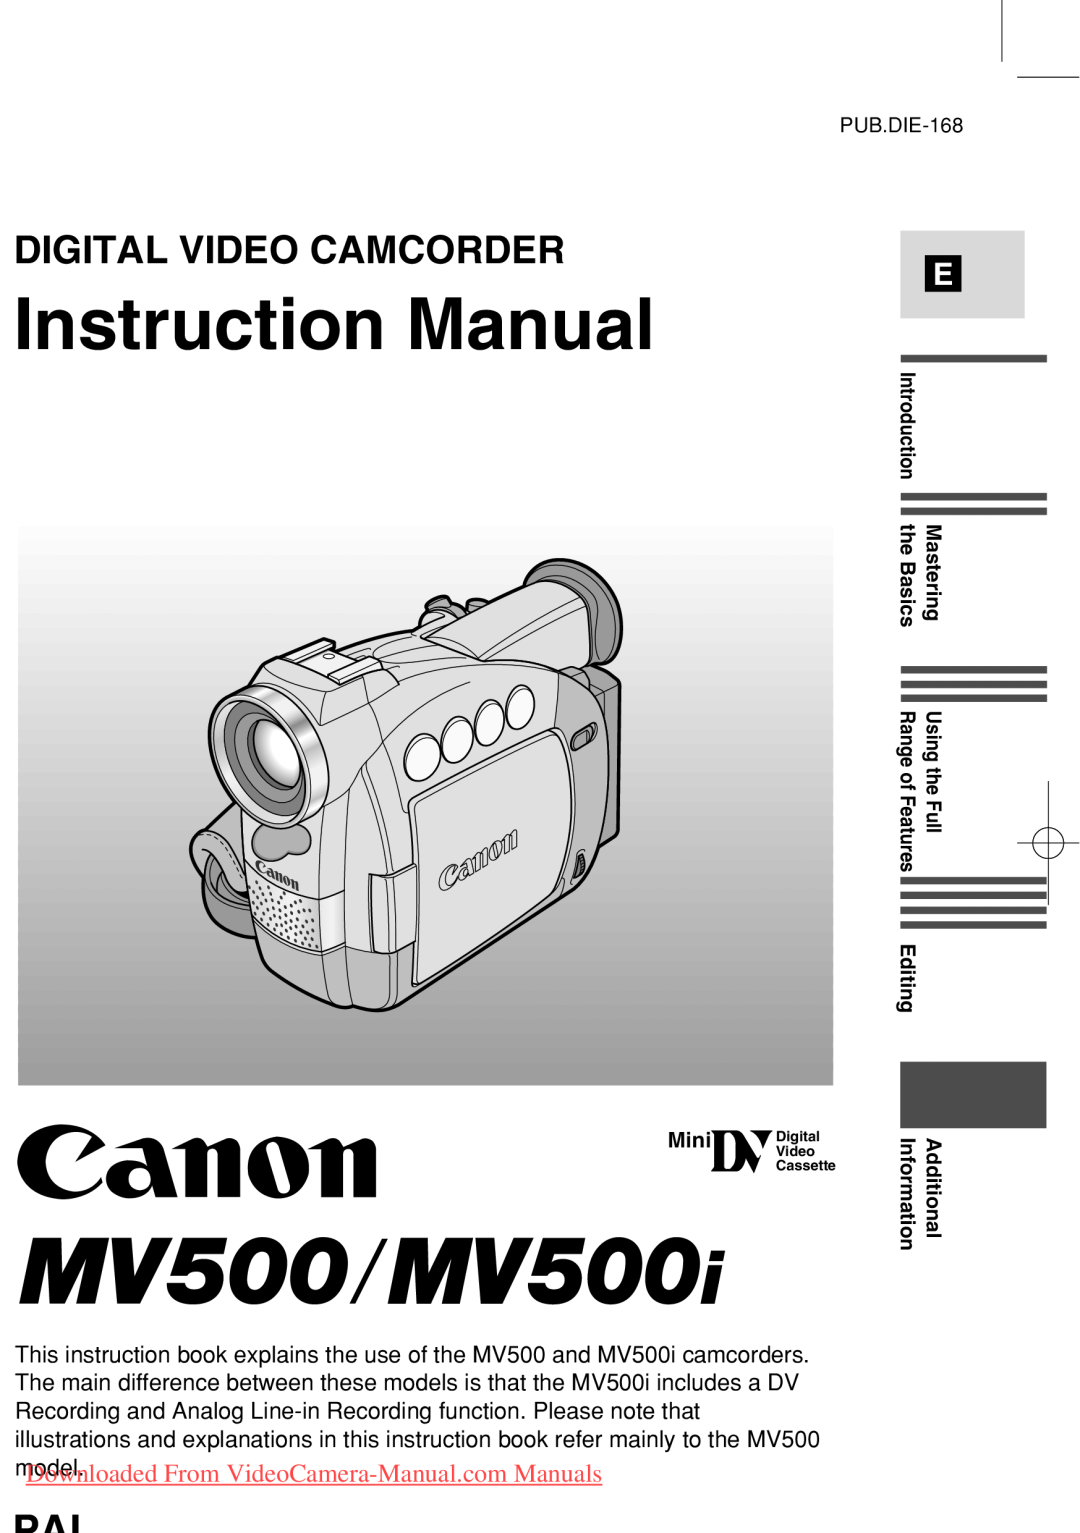 Canon MV500 Instruction Manual, Digital Video Camcorder, Downloaded From VideoCamera-Manual.com Manuals, model, Additional 